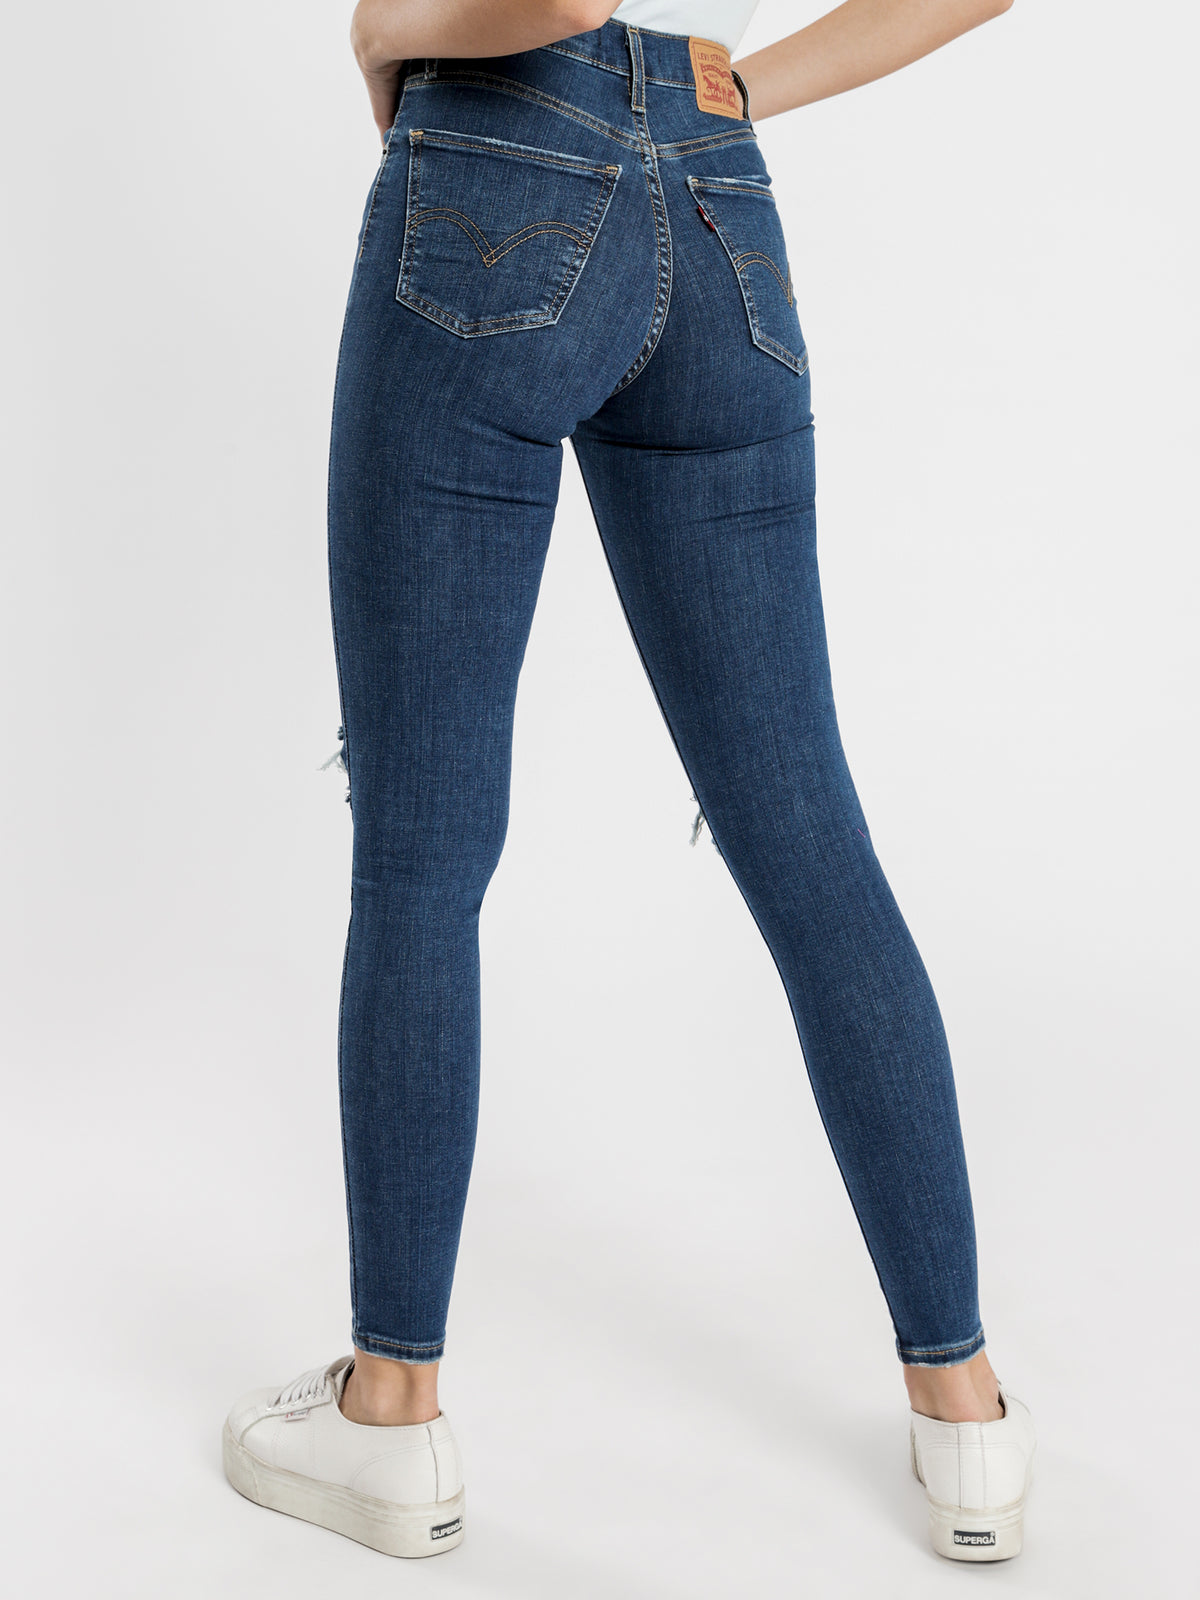 Mile High Super Skinny Jeans in Shady Business Blue Denim